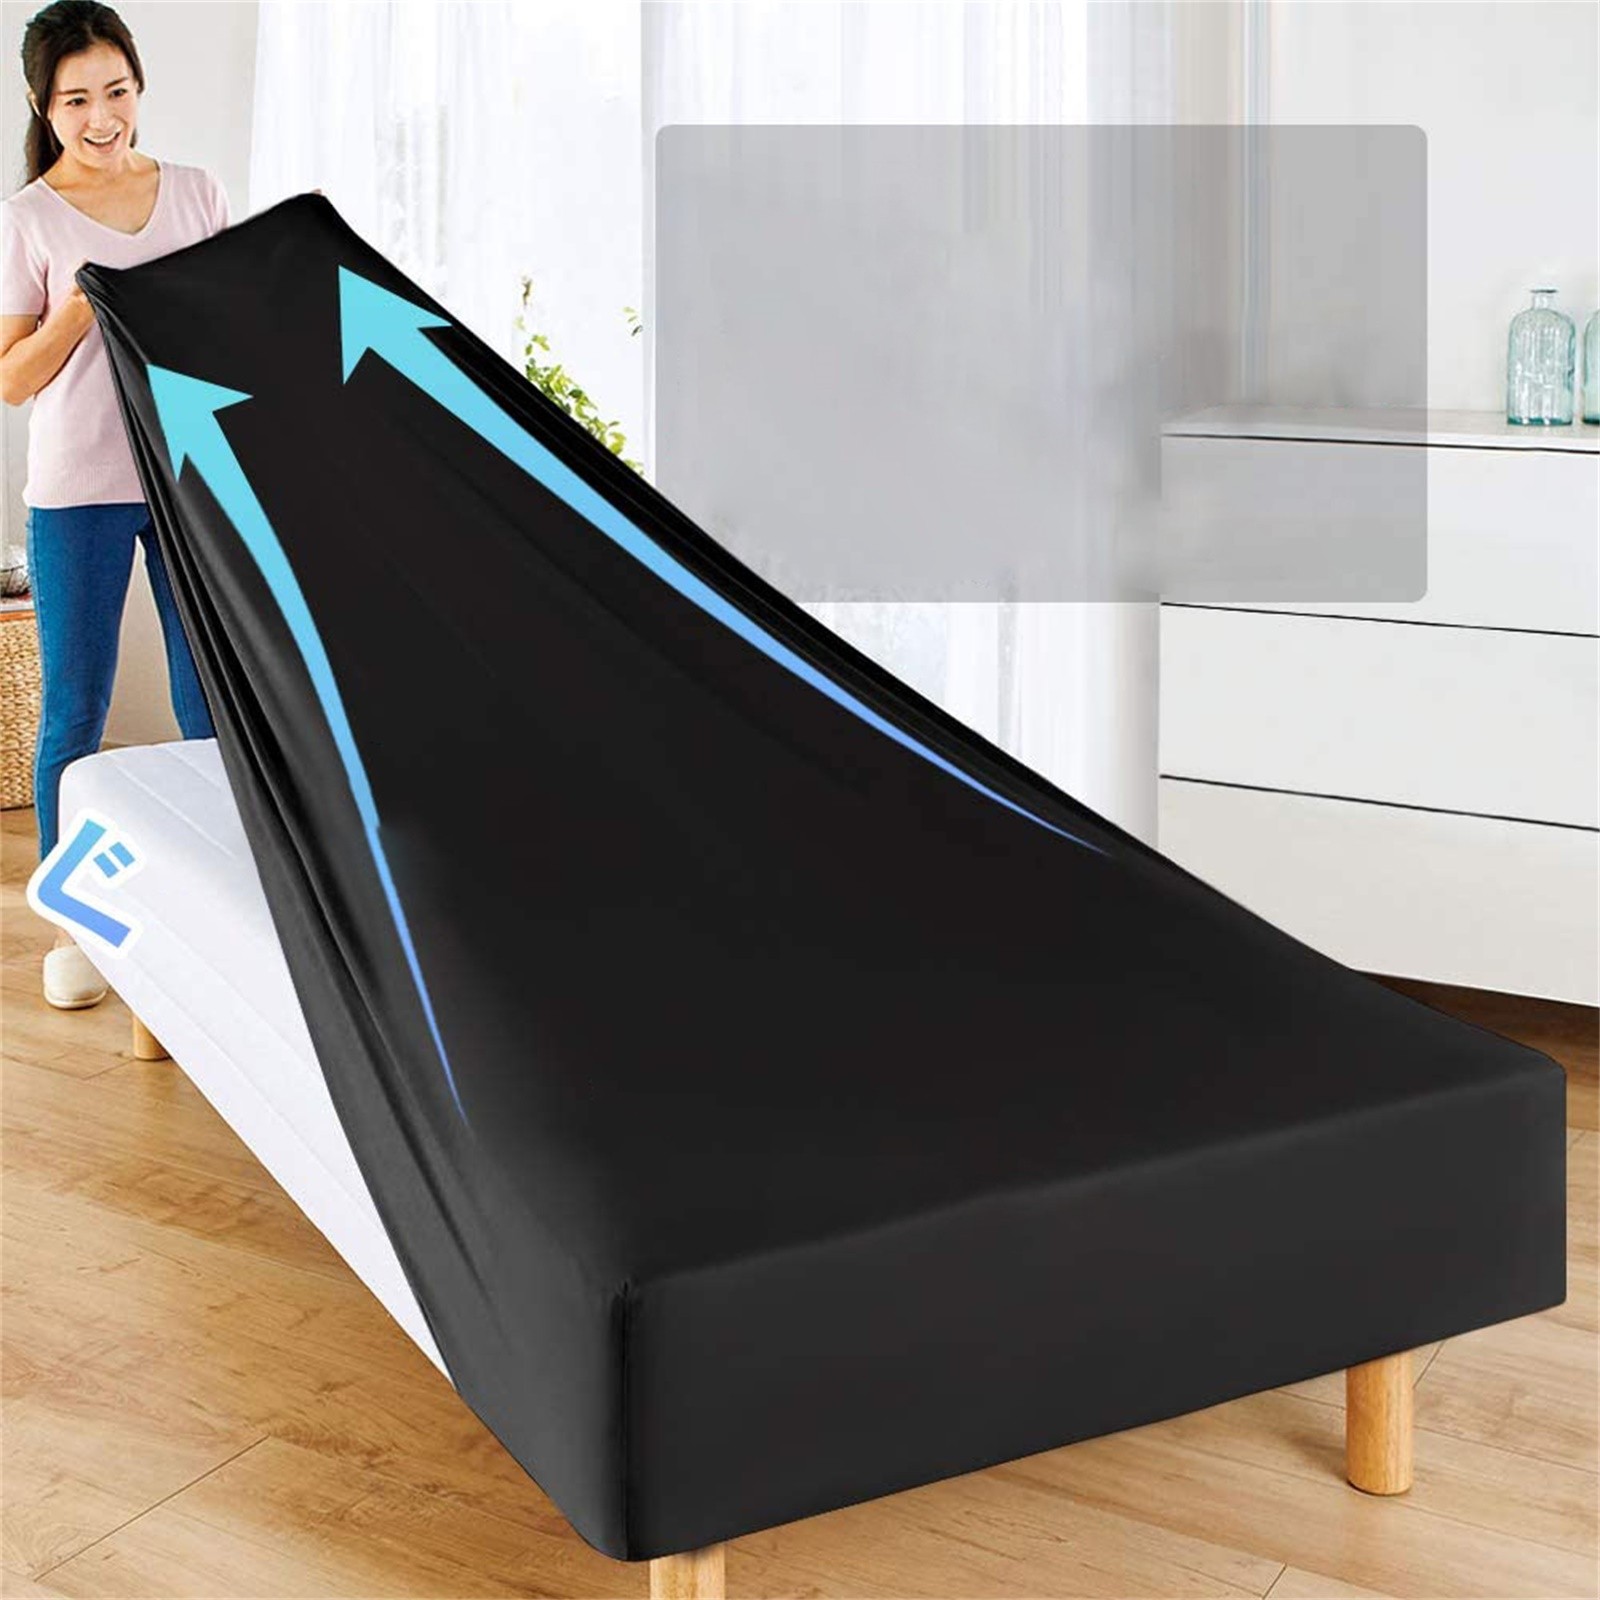 1pcs Black Bed Sheet Elastic Solid Fitted Sheets Absorbent Washable Quick Drying Bed Sheets Home Hotel Mattress Protector Cover